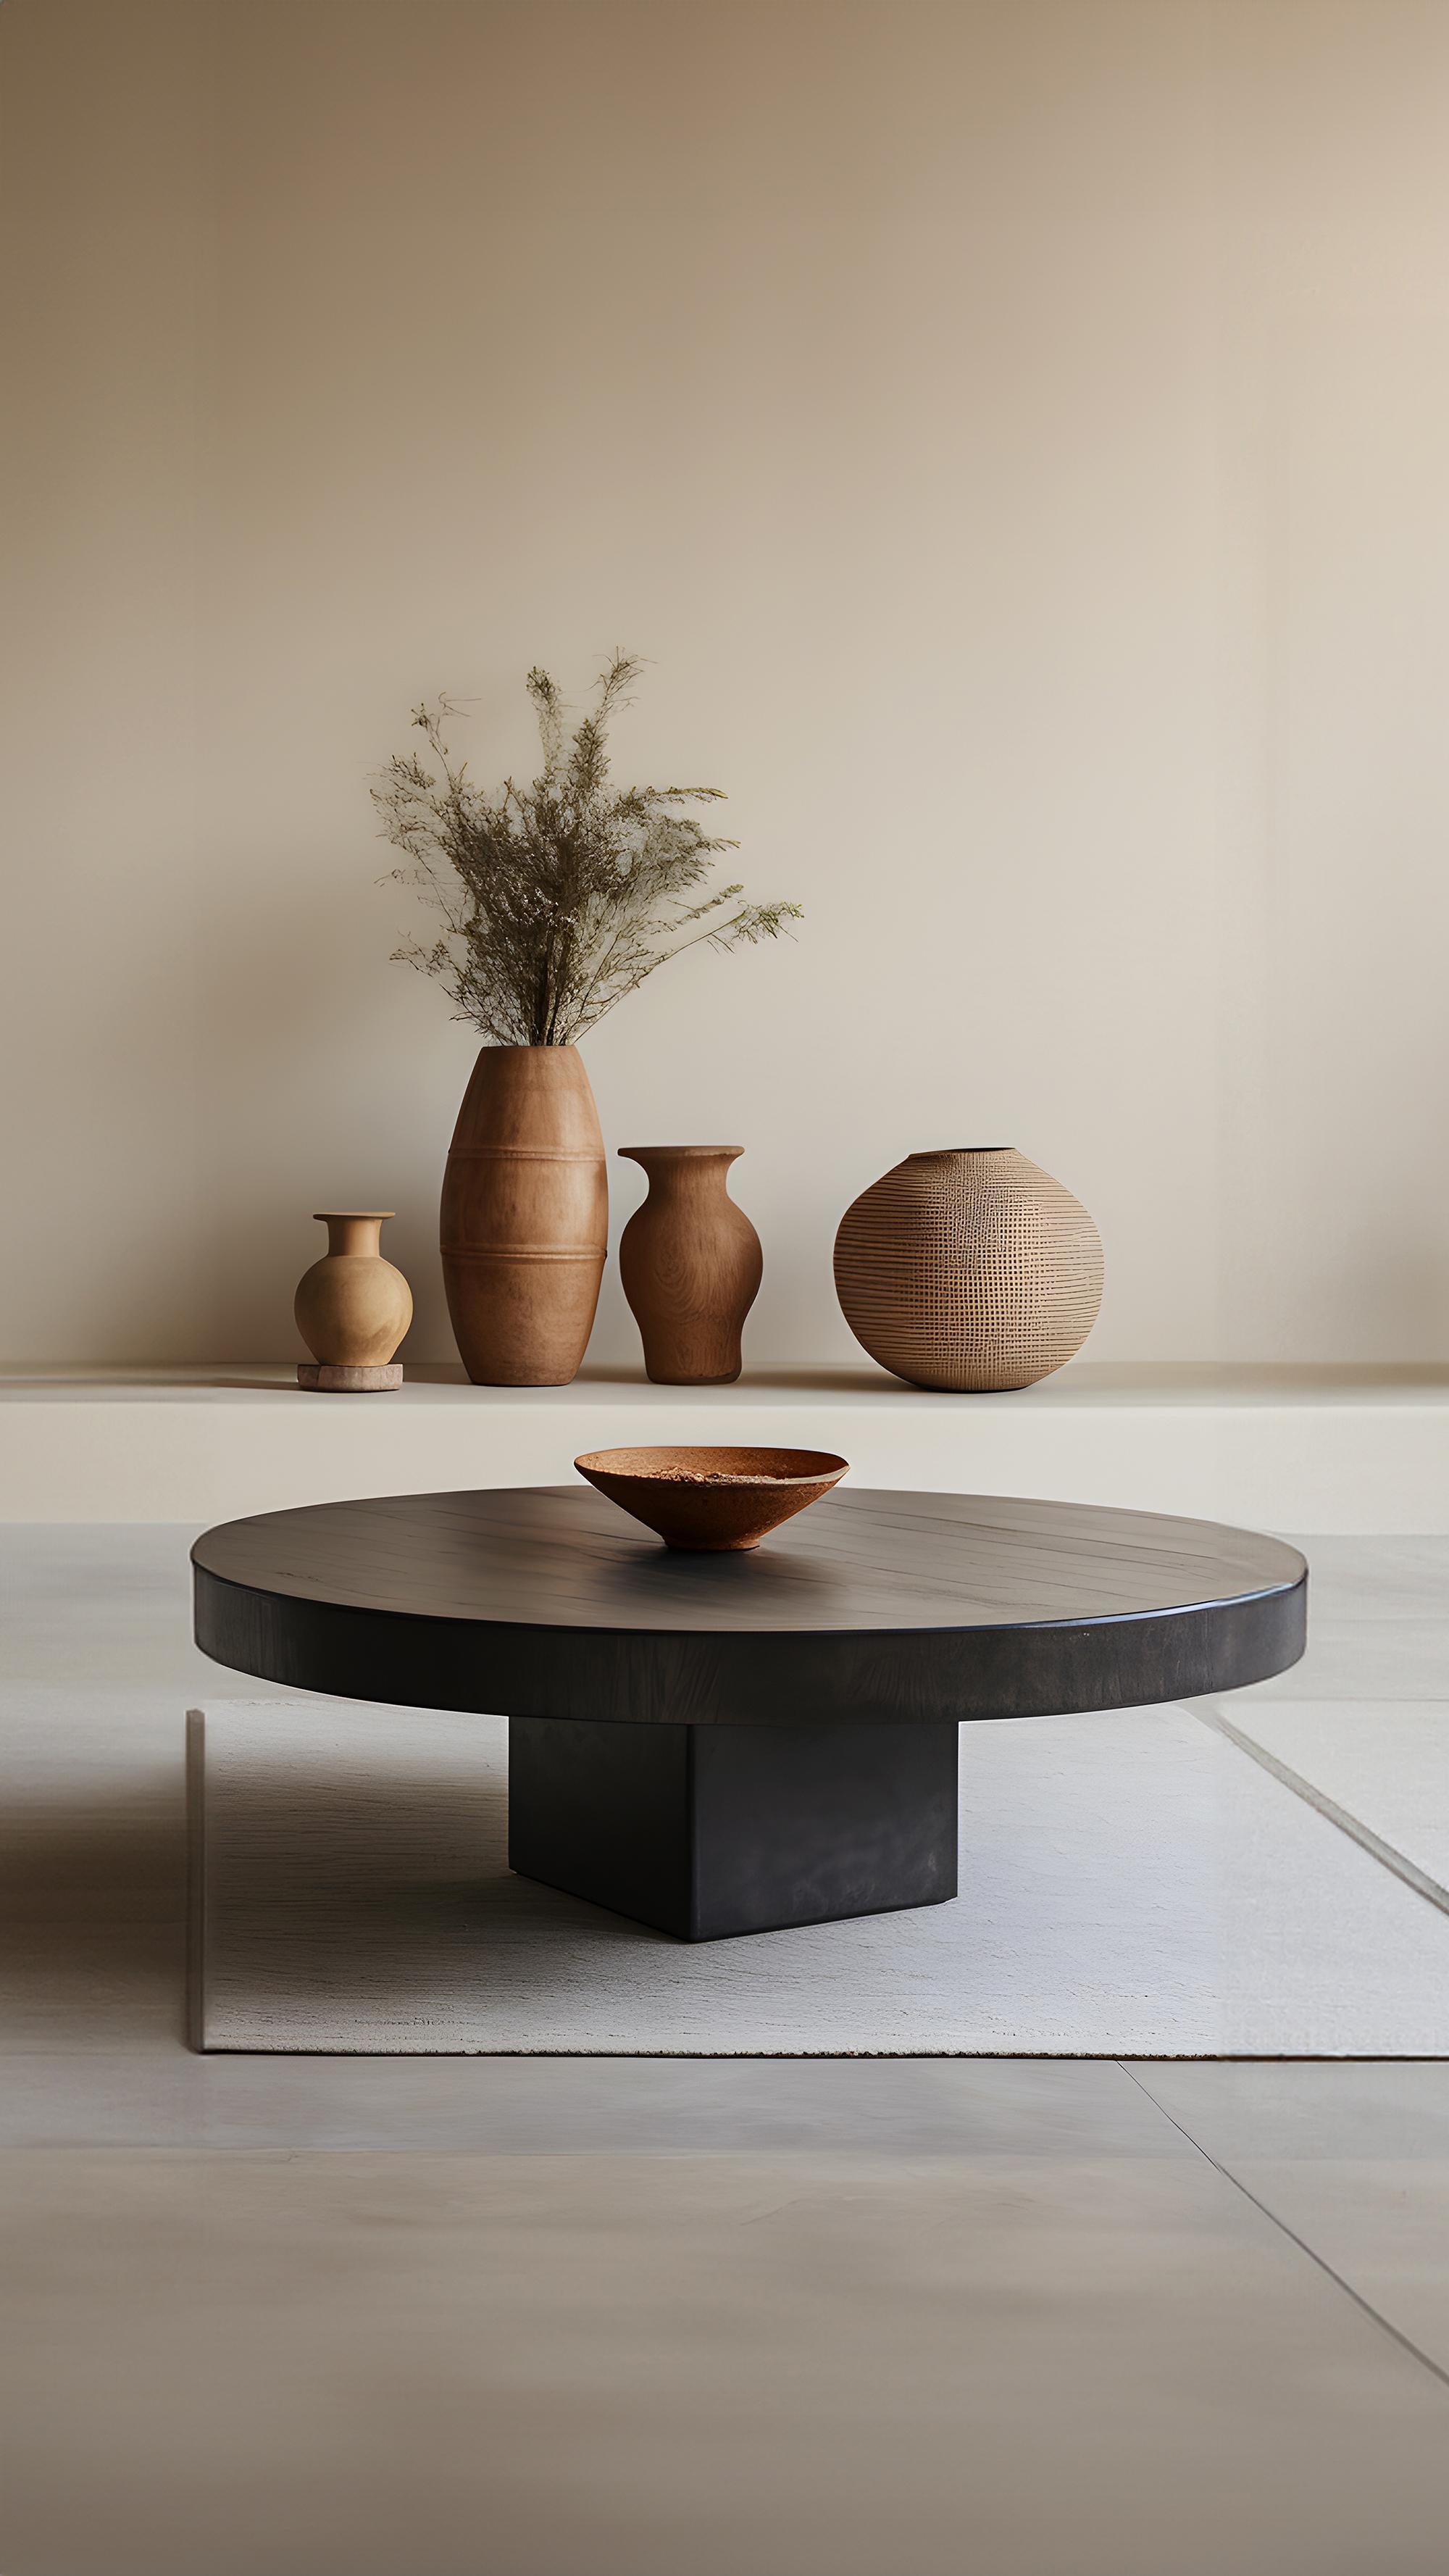 Hardwood Chic Black Tinted Round Coffee Table - Urban Fundamenta 27 by NONO For Sale